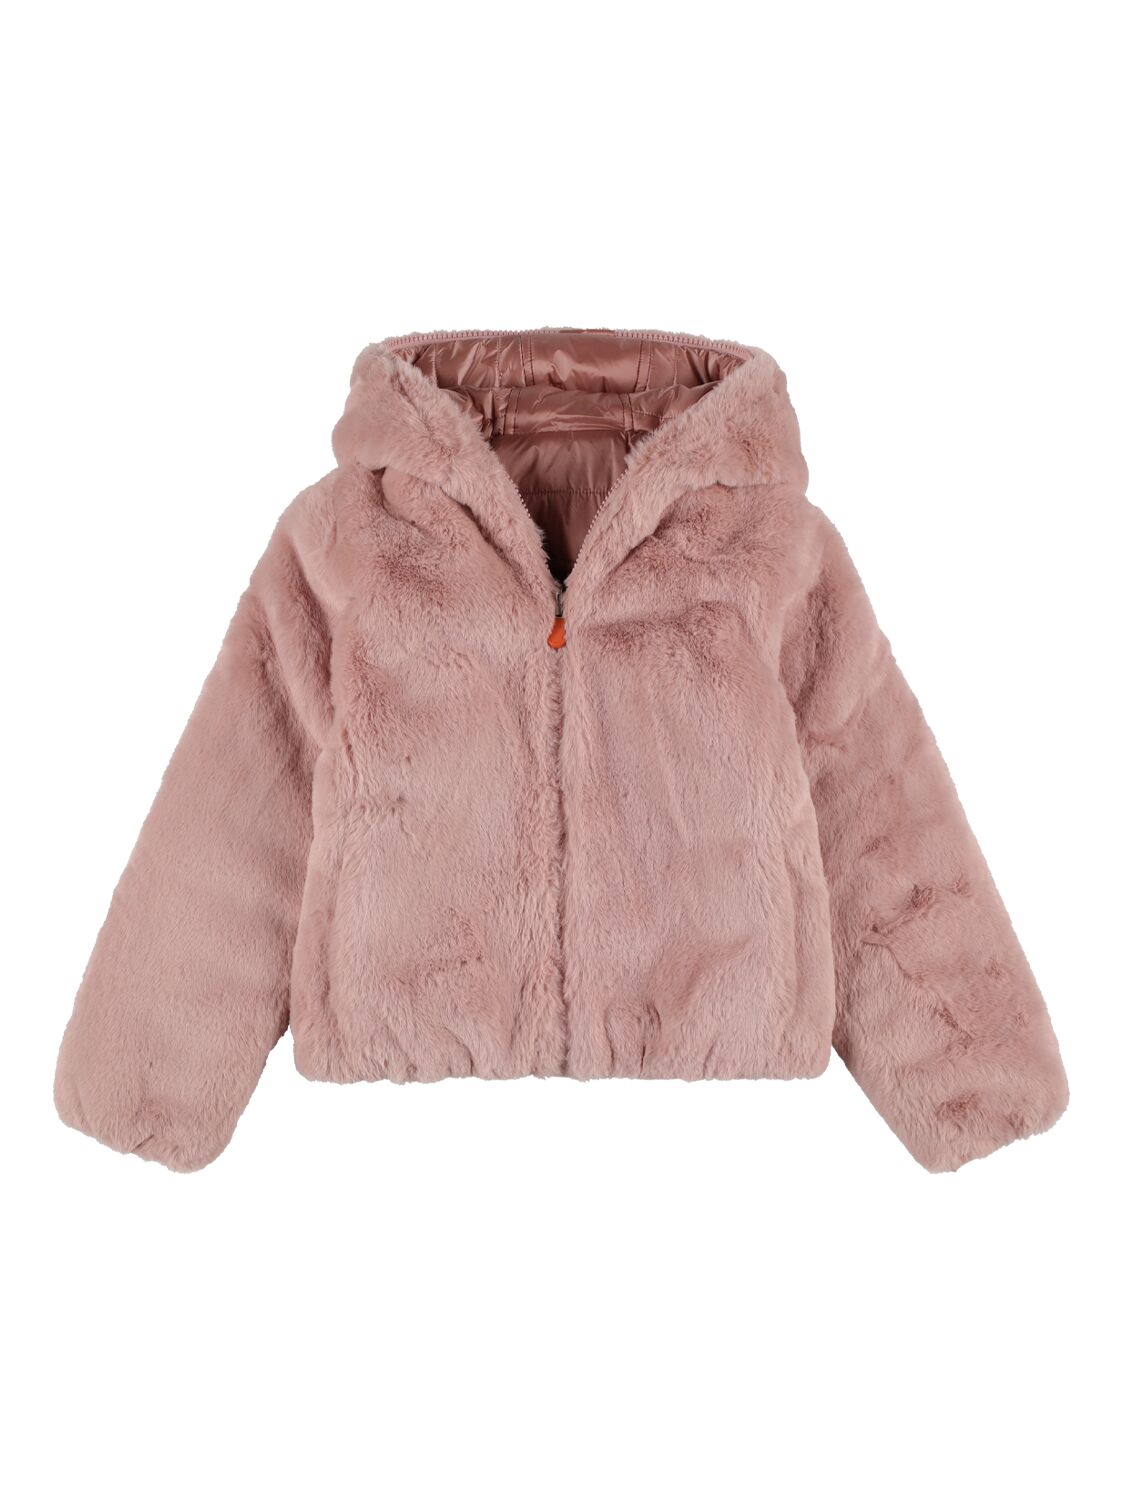 SAVE THE DUCK REVERSIBLE FAUX FUR & RECYCLED JACKET